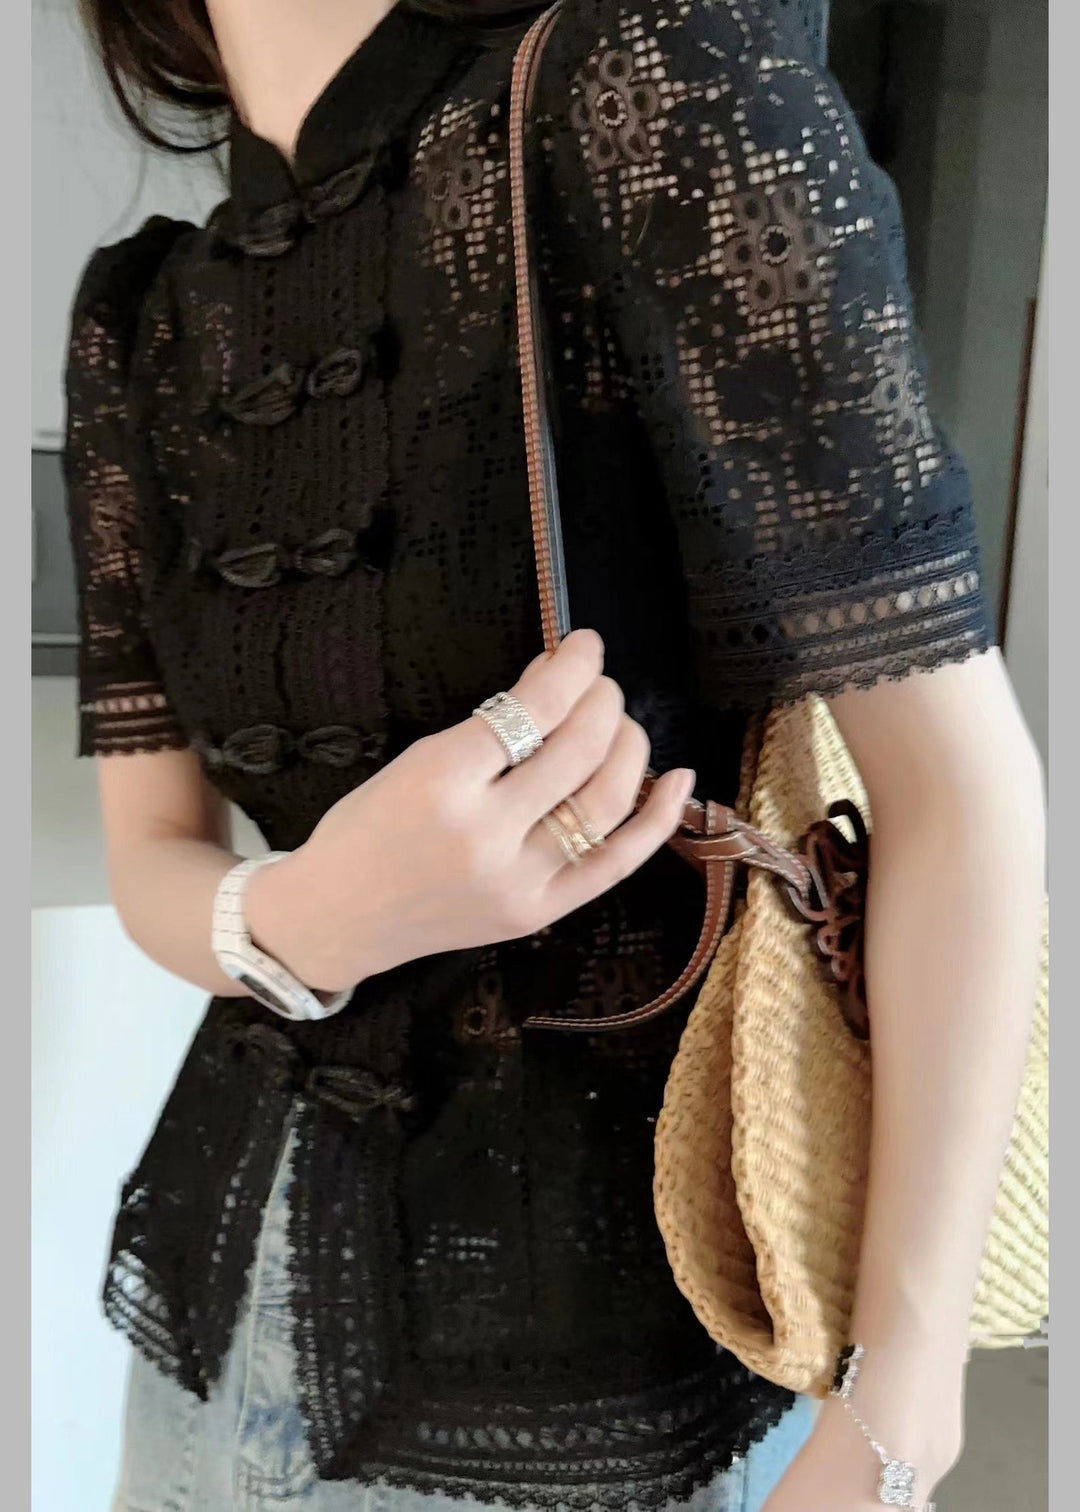 Black Stand Collar Button Lace Shirt Puff Sleeve